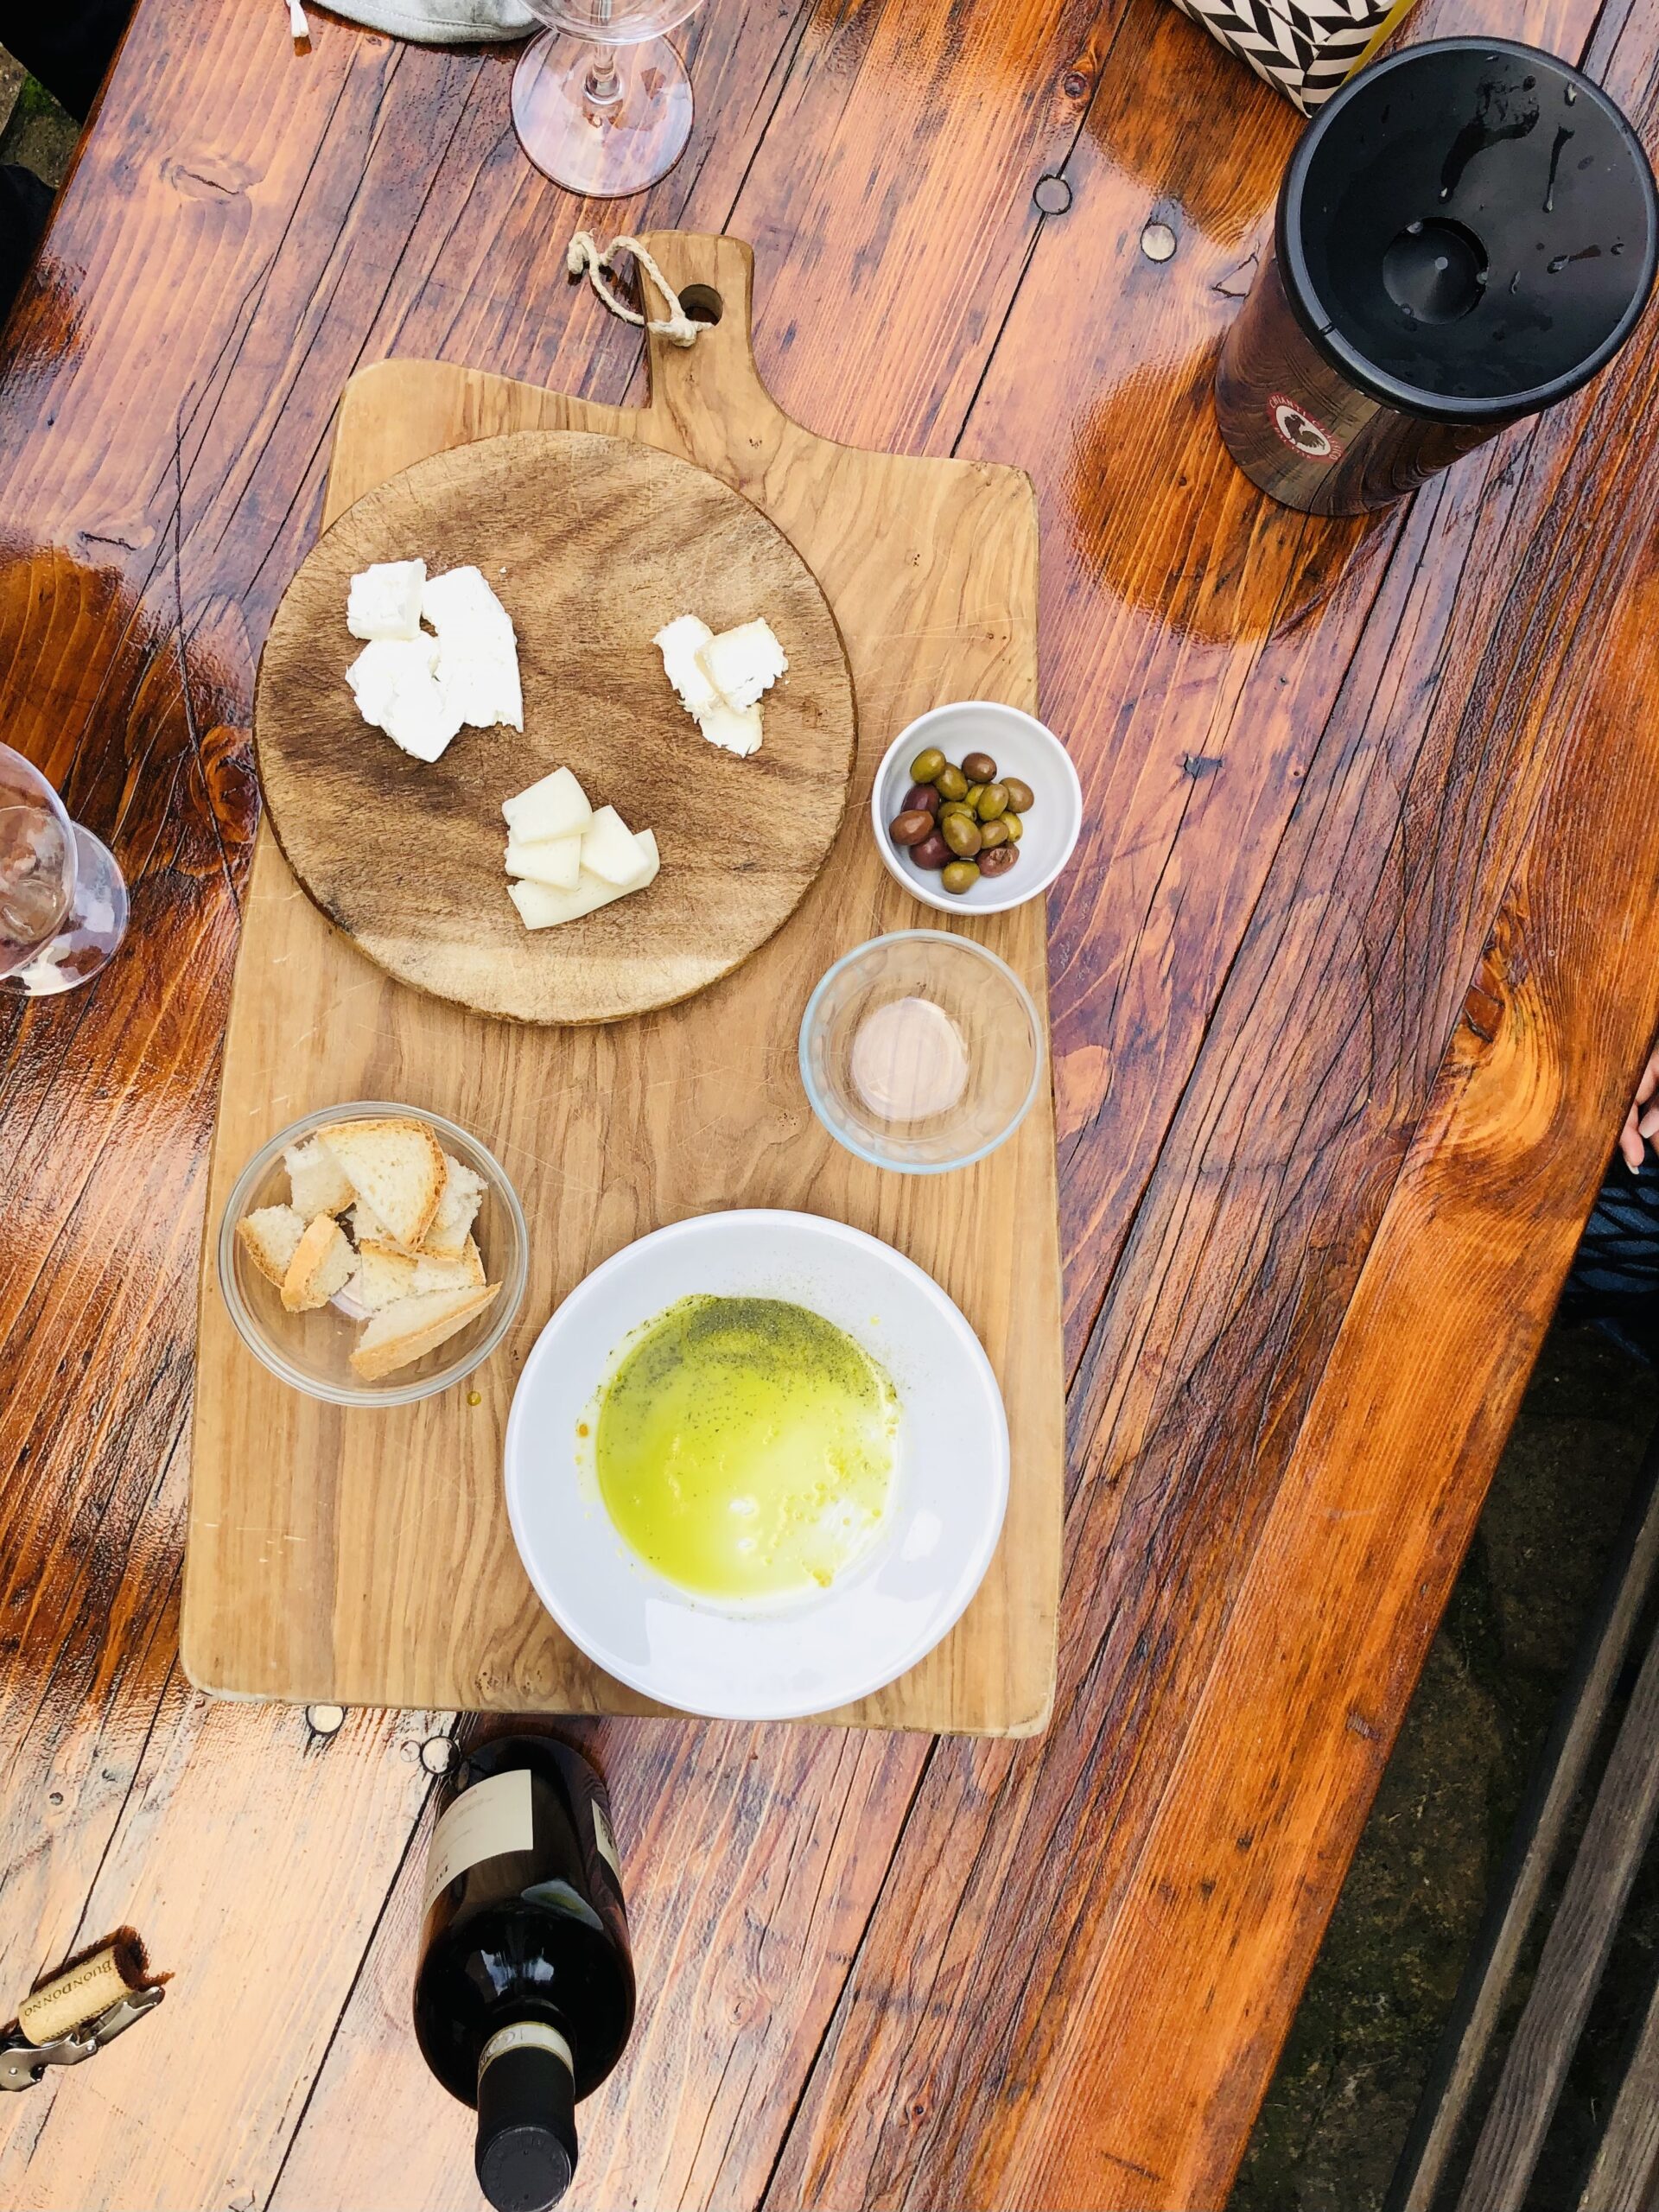 Olive oil tasting and hand made cheese